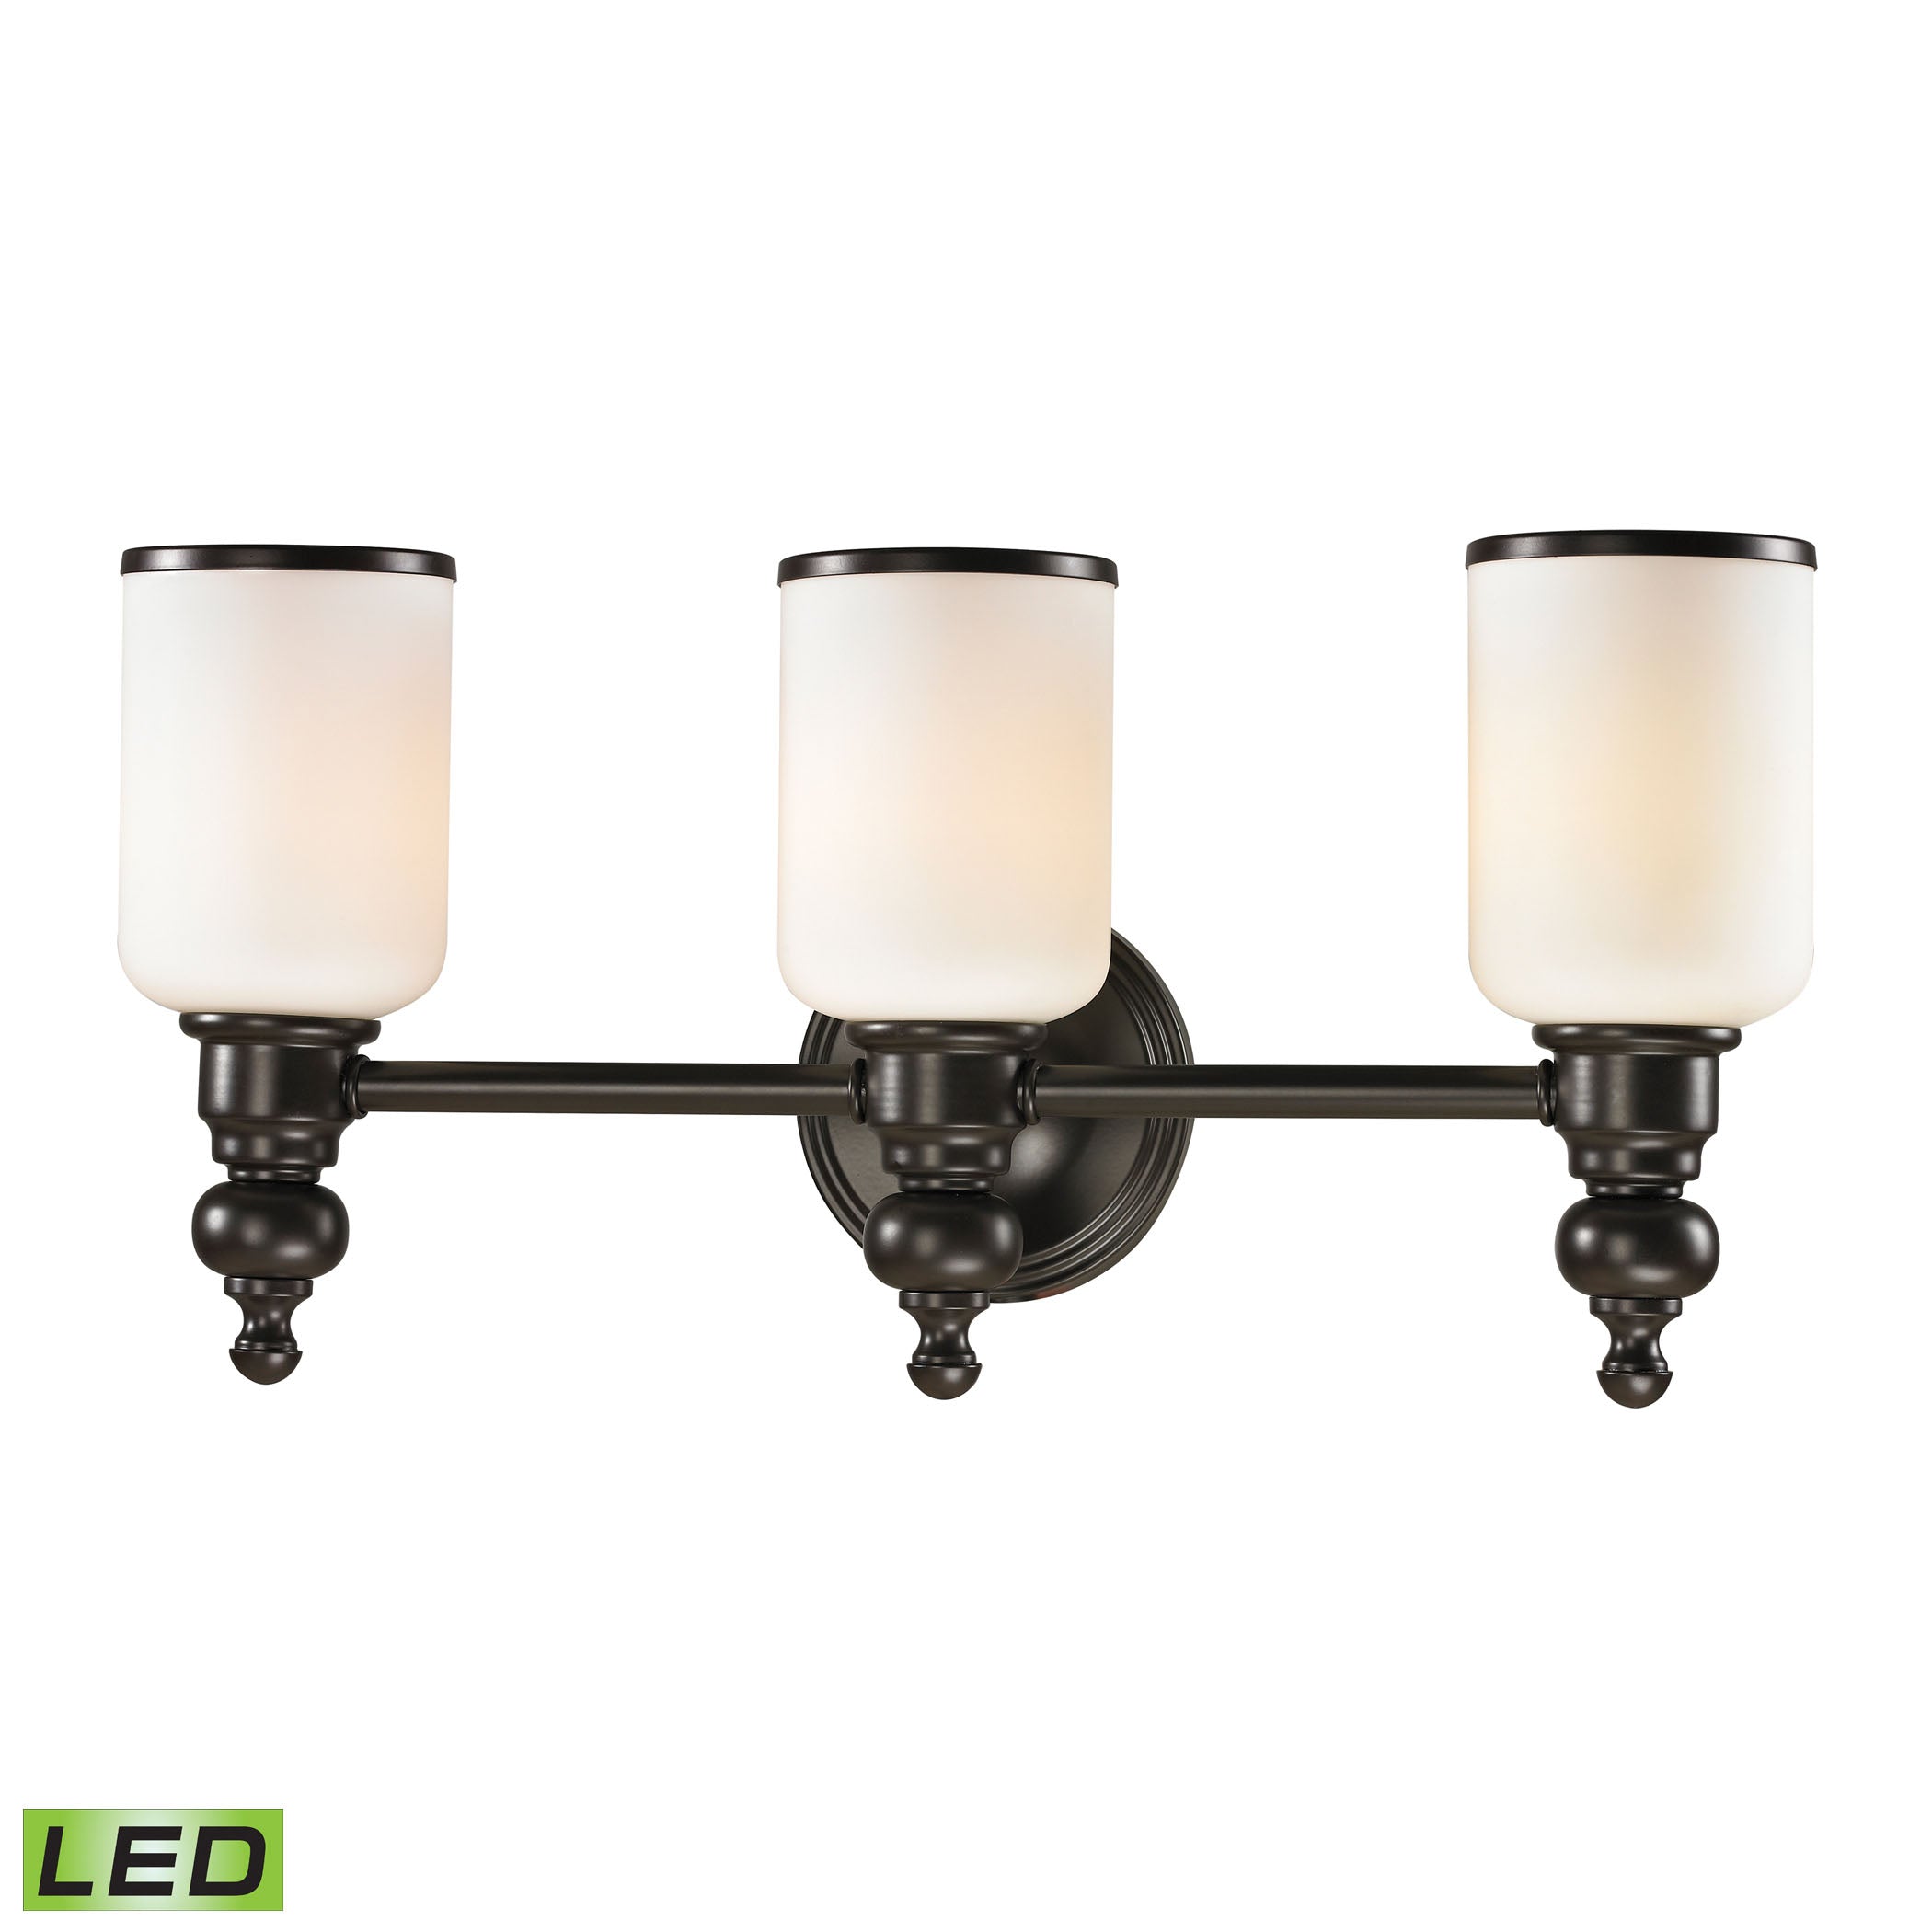 ELK Lighting 11592/3-LED Bristol 3-Light Vanity Lamp in Oil Rubbed Bronze with Opal White Blown Glass - Includes LED Bulbs